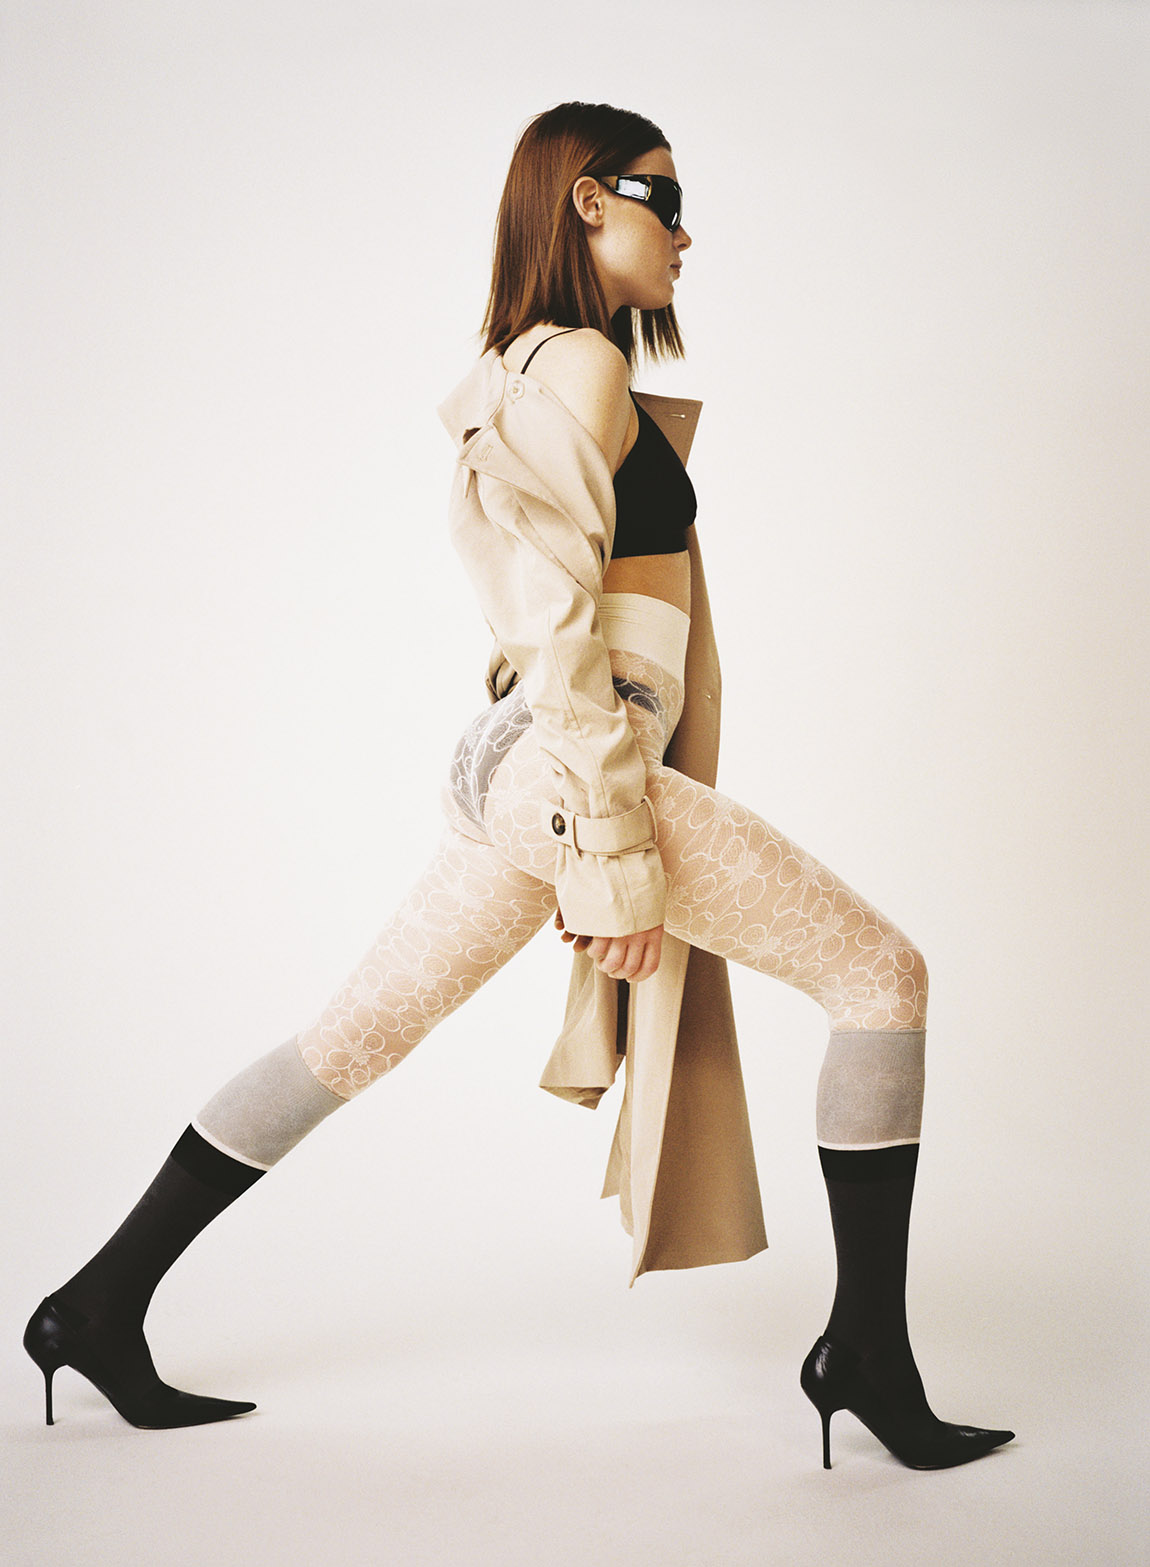 Swedish Stockings: Premium recycled tights, designed with the future in mind